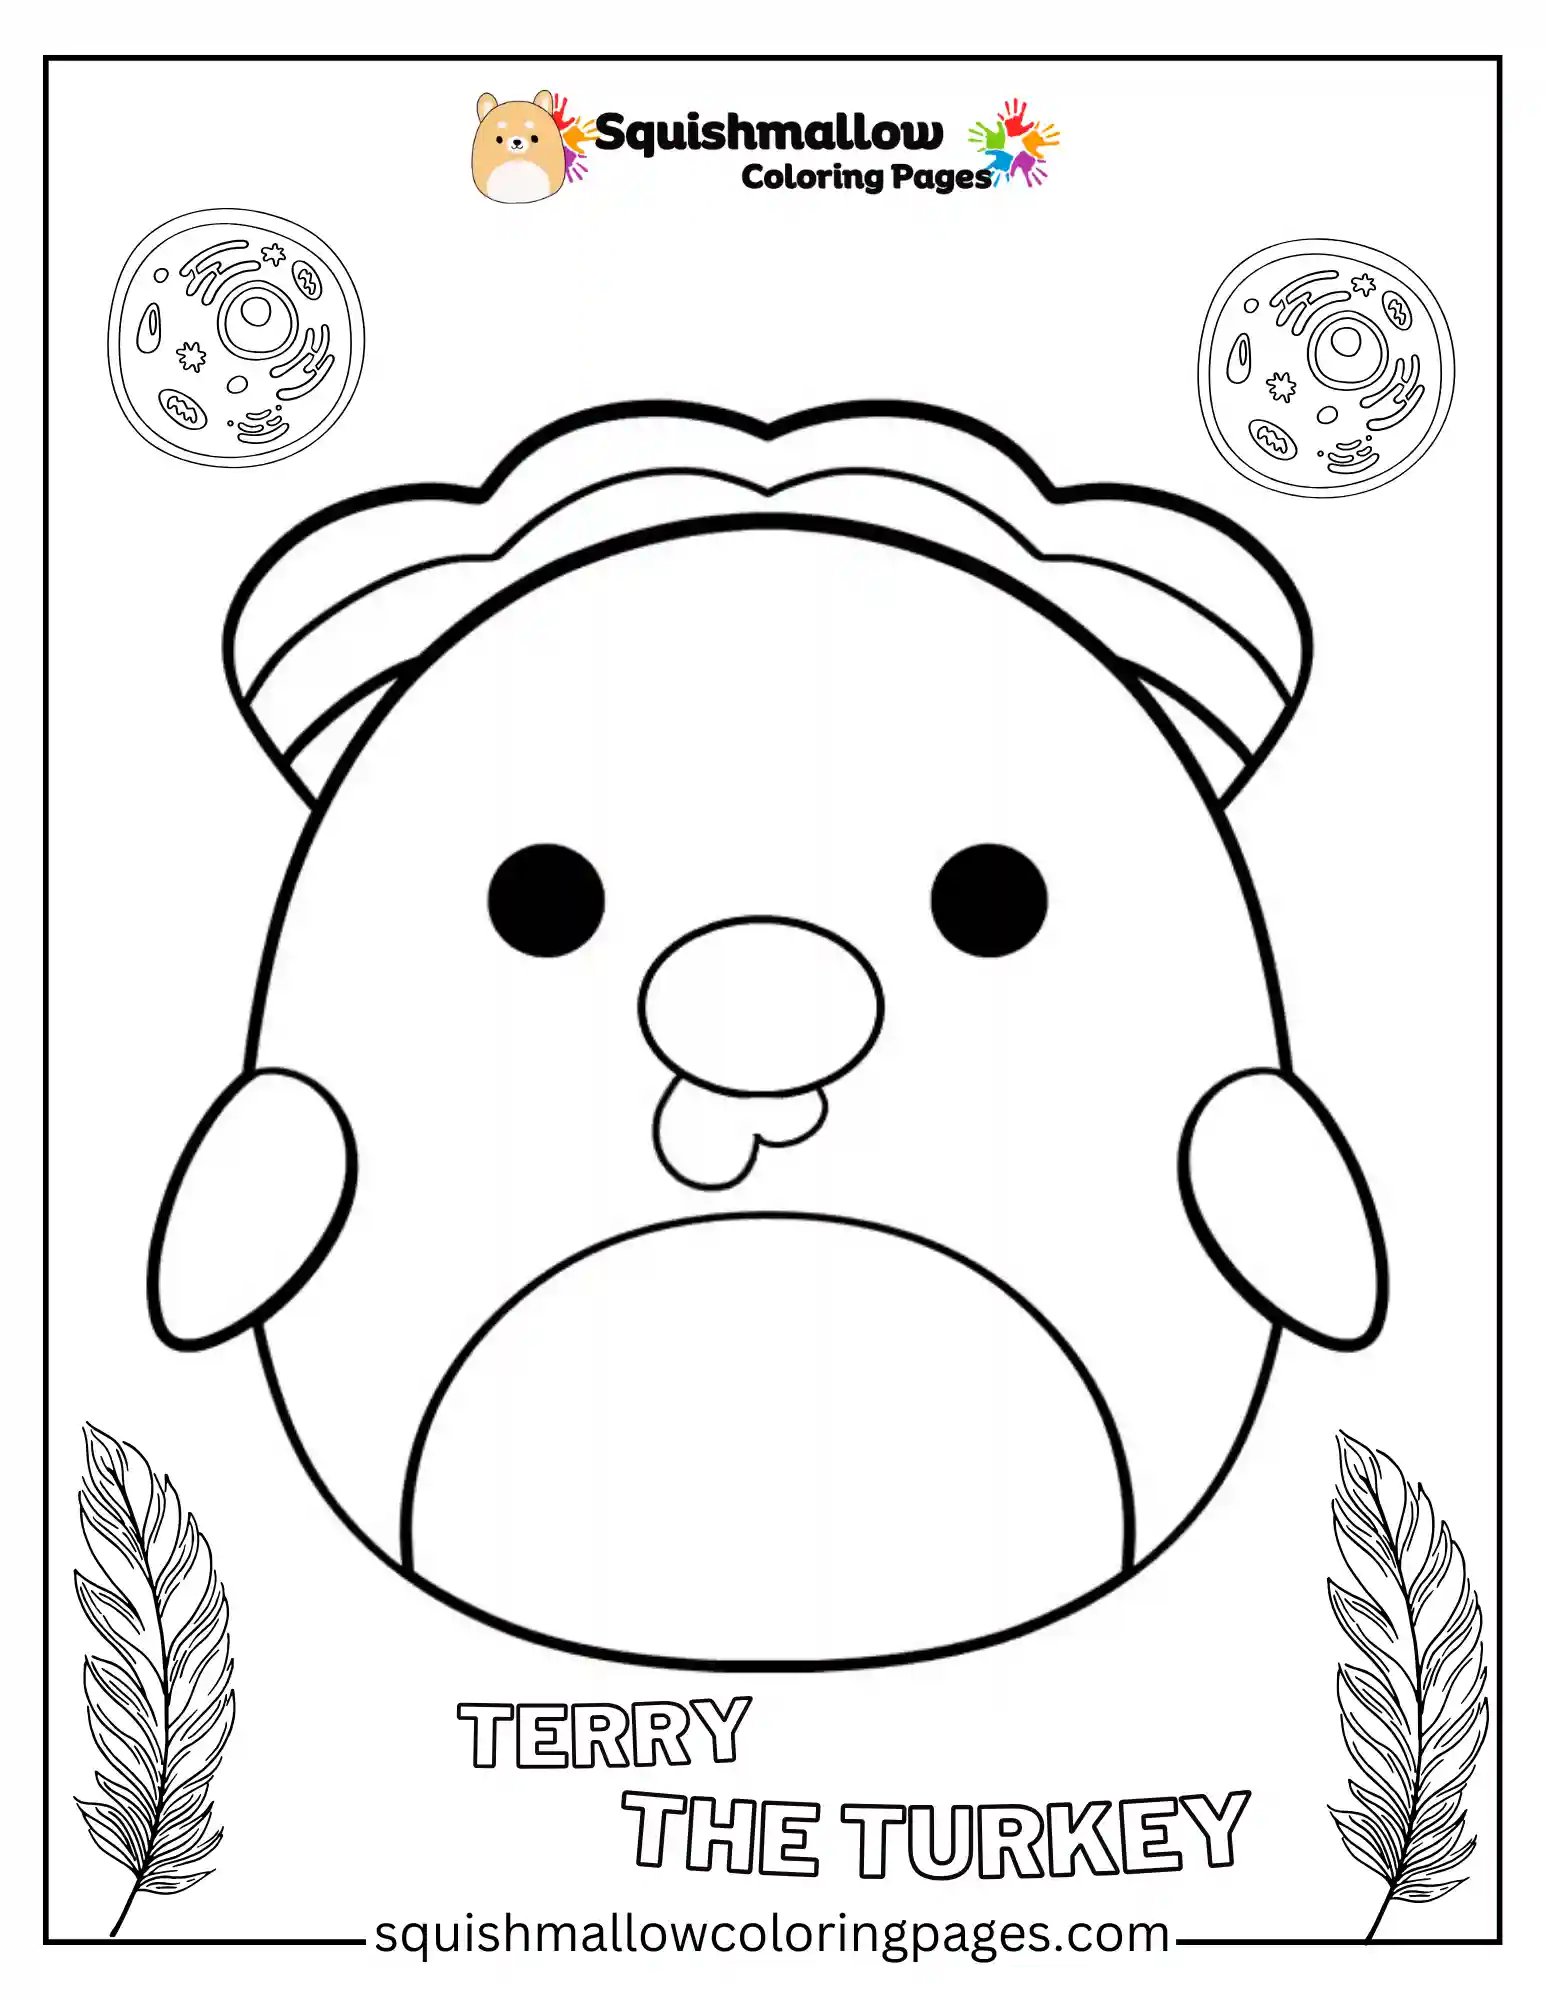 Terry The Turkey Squishmallow Coloring Pages